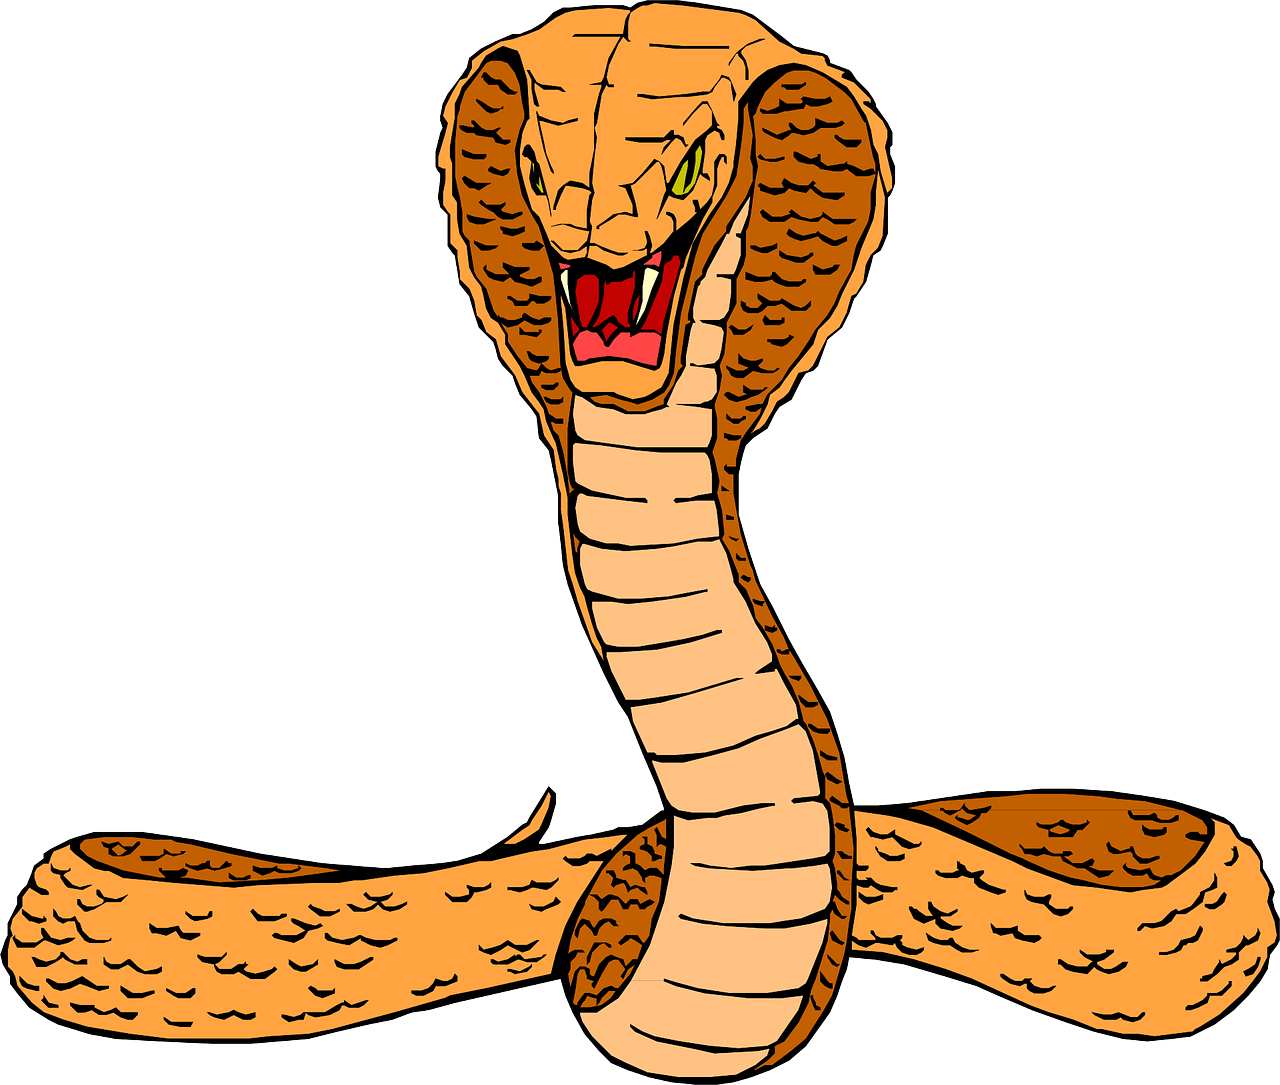 a close up of a snake on a white background, an illustration of, cobra, illustration], an angry expression, coloured, pillar